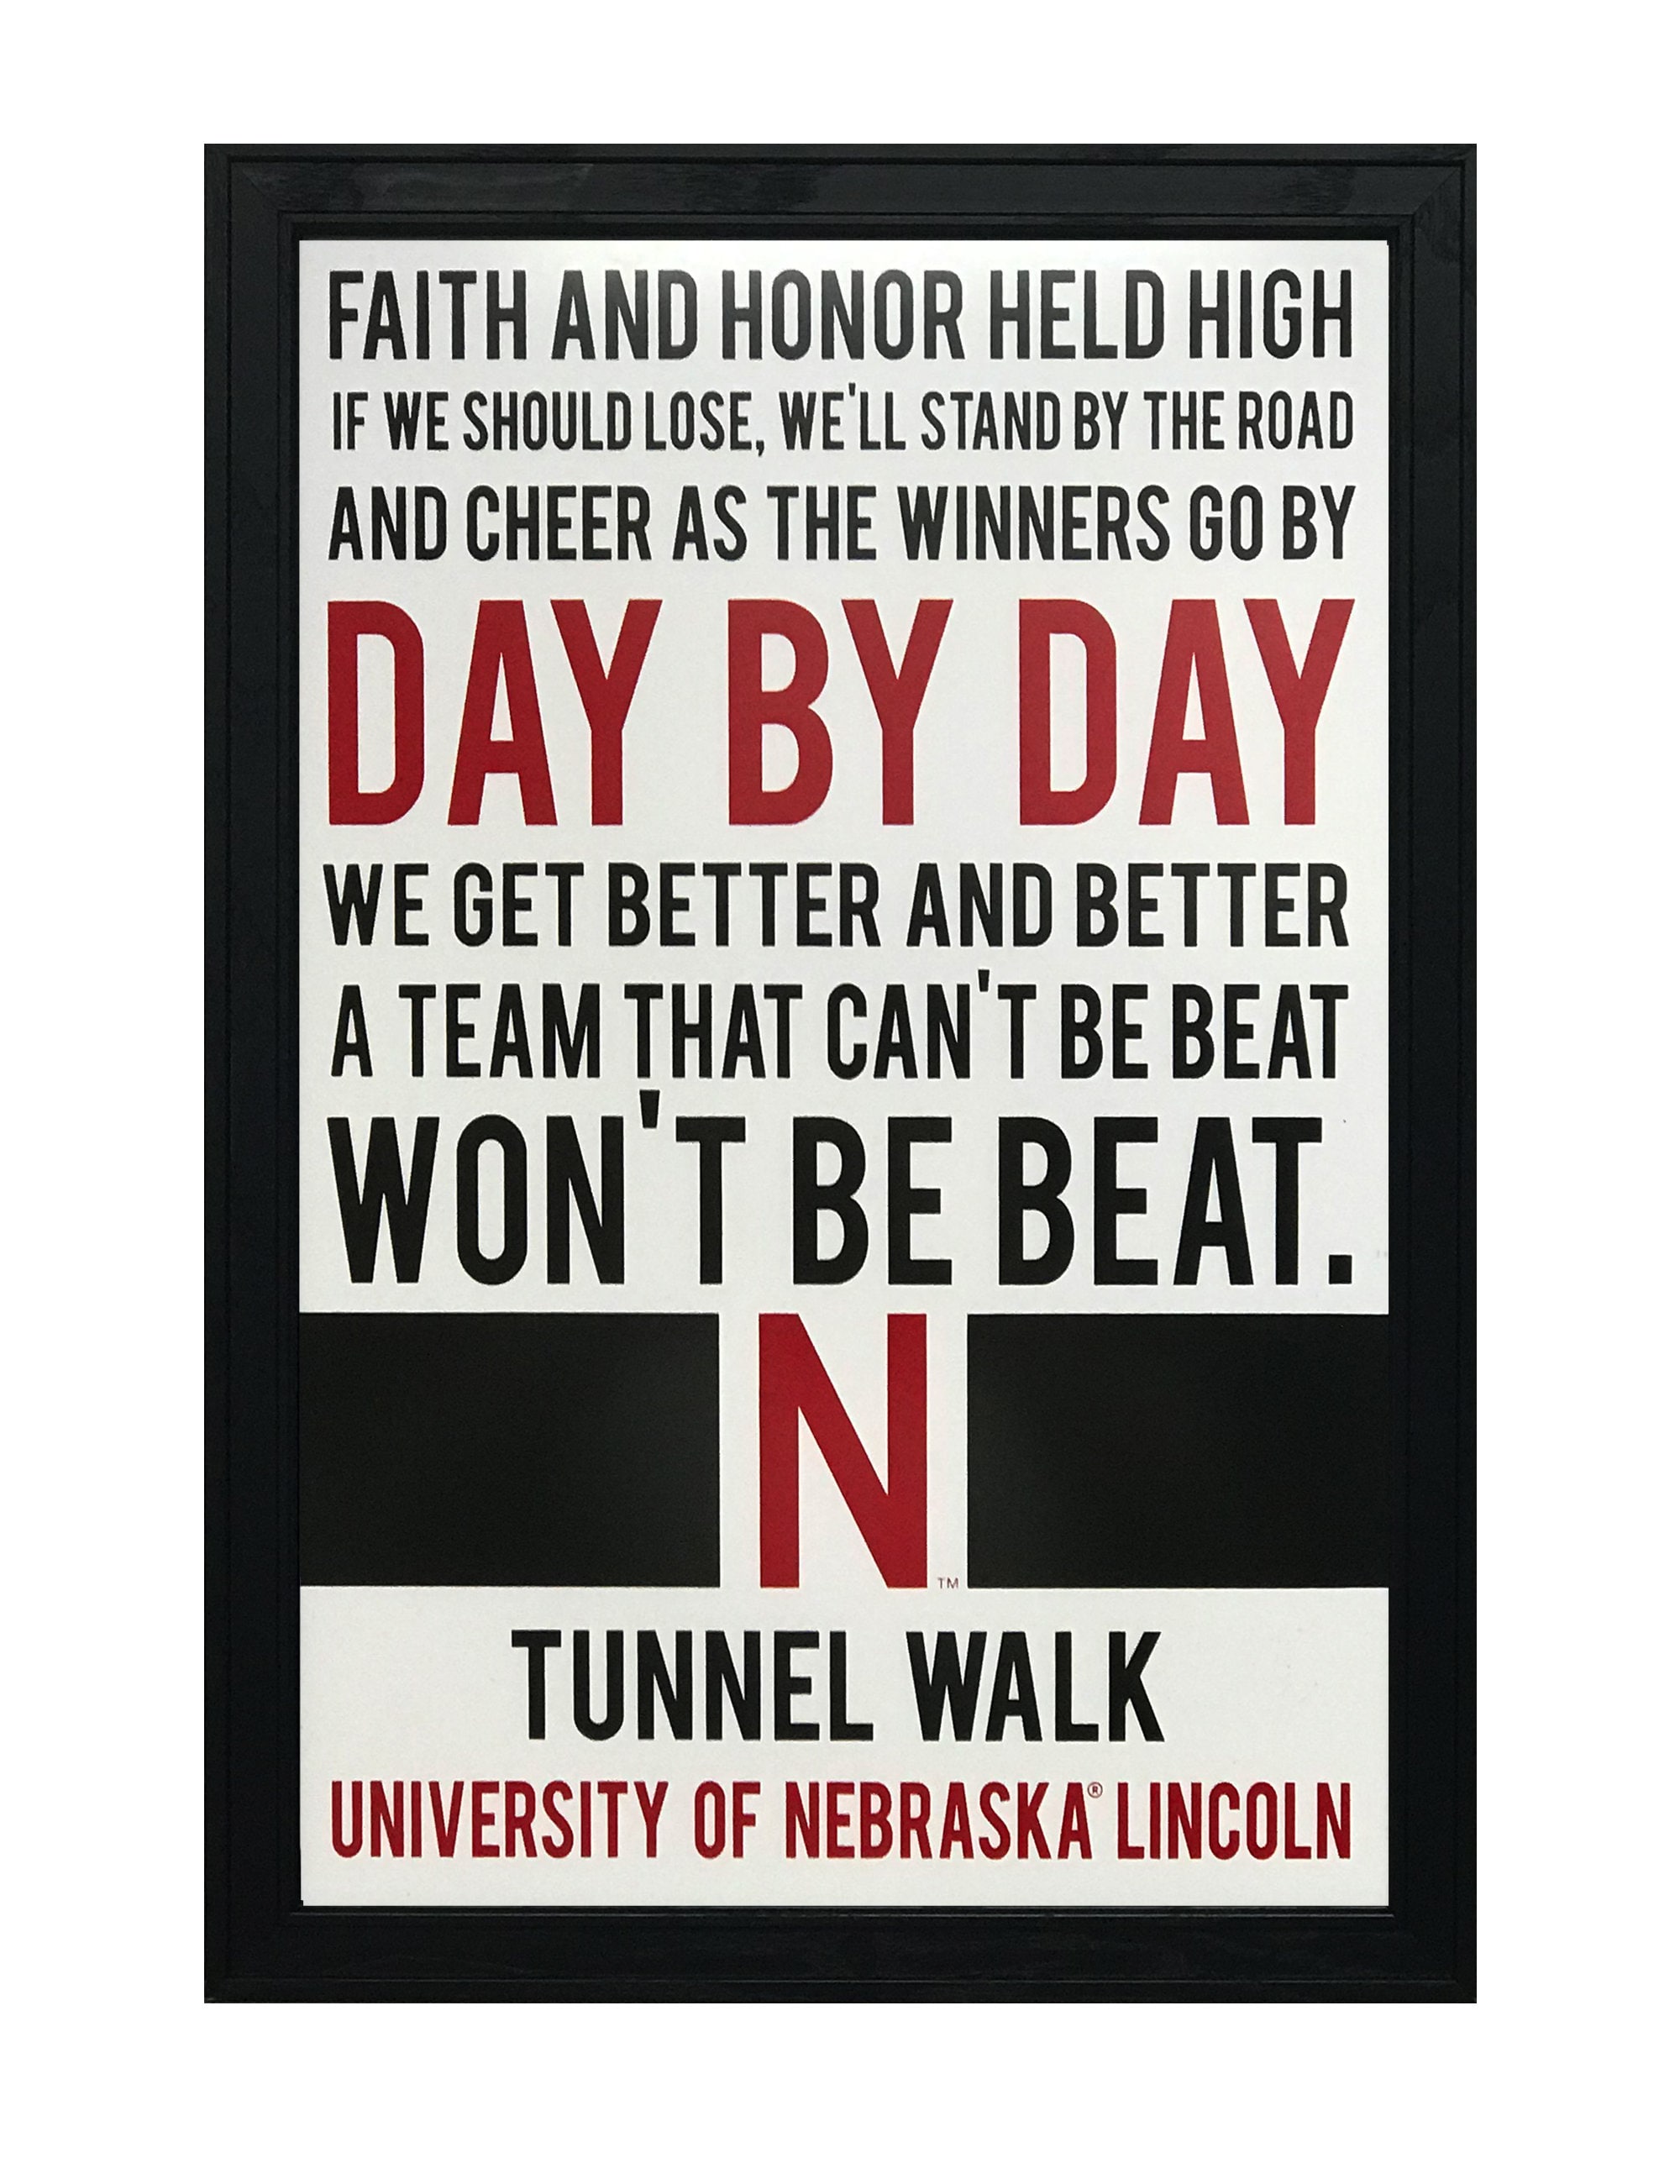 New Huskers celebrate with Tunnel Walk, convocation, Nebraska Today